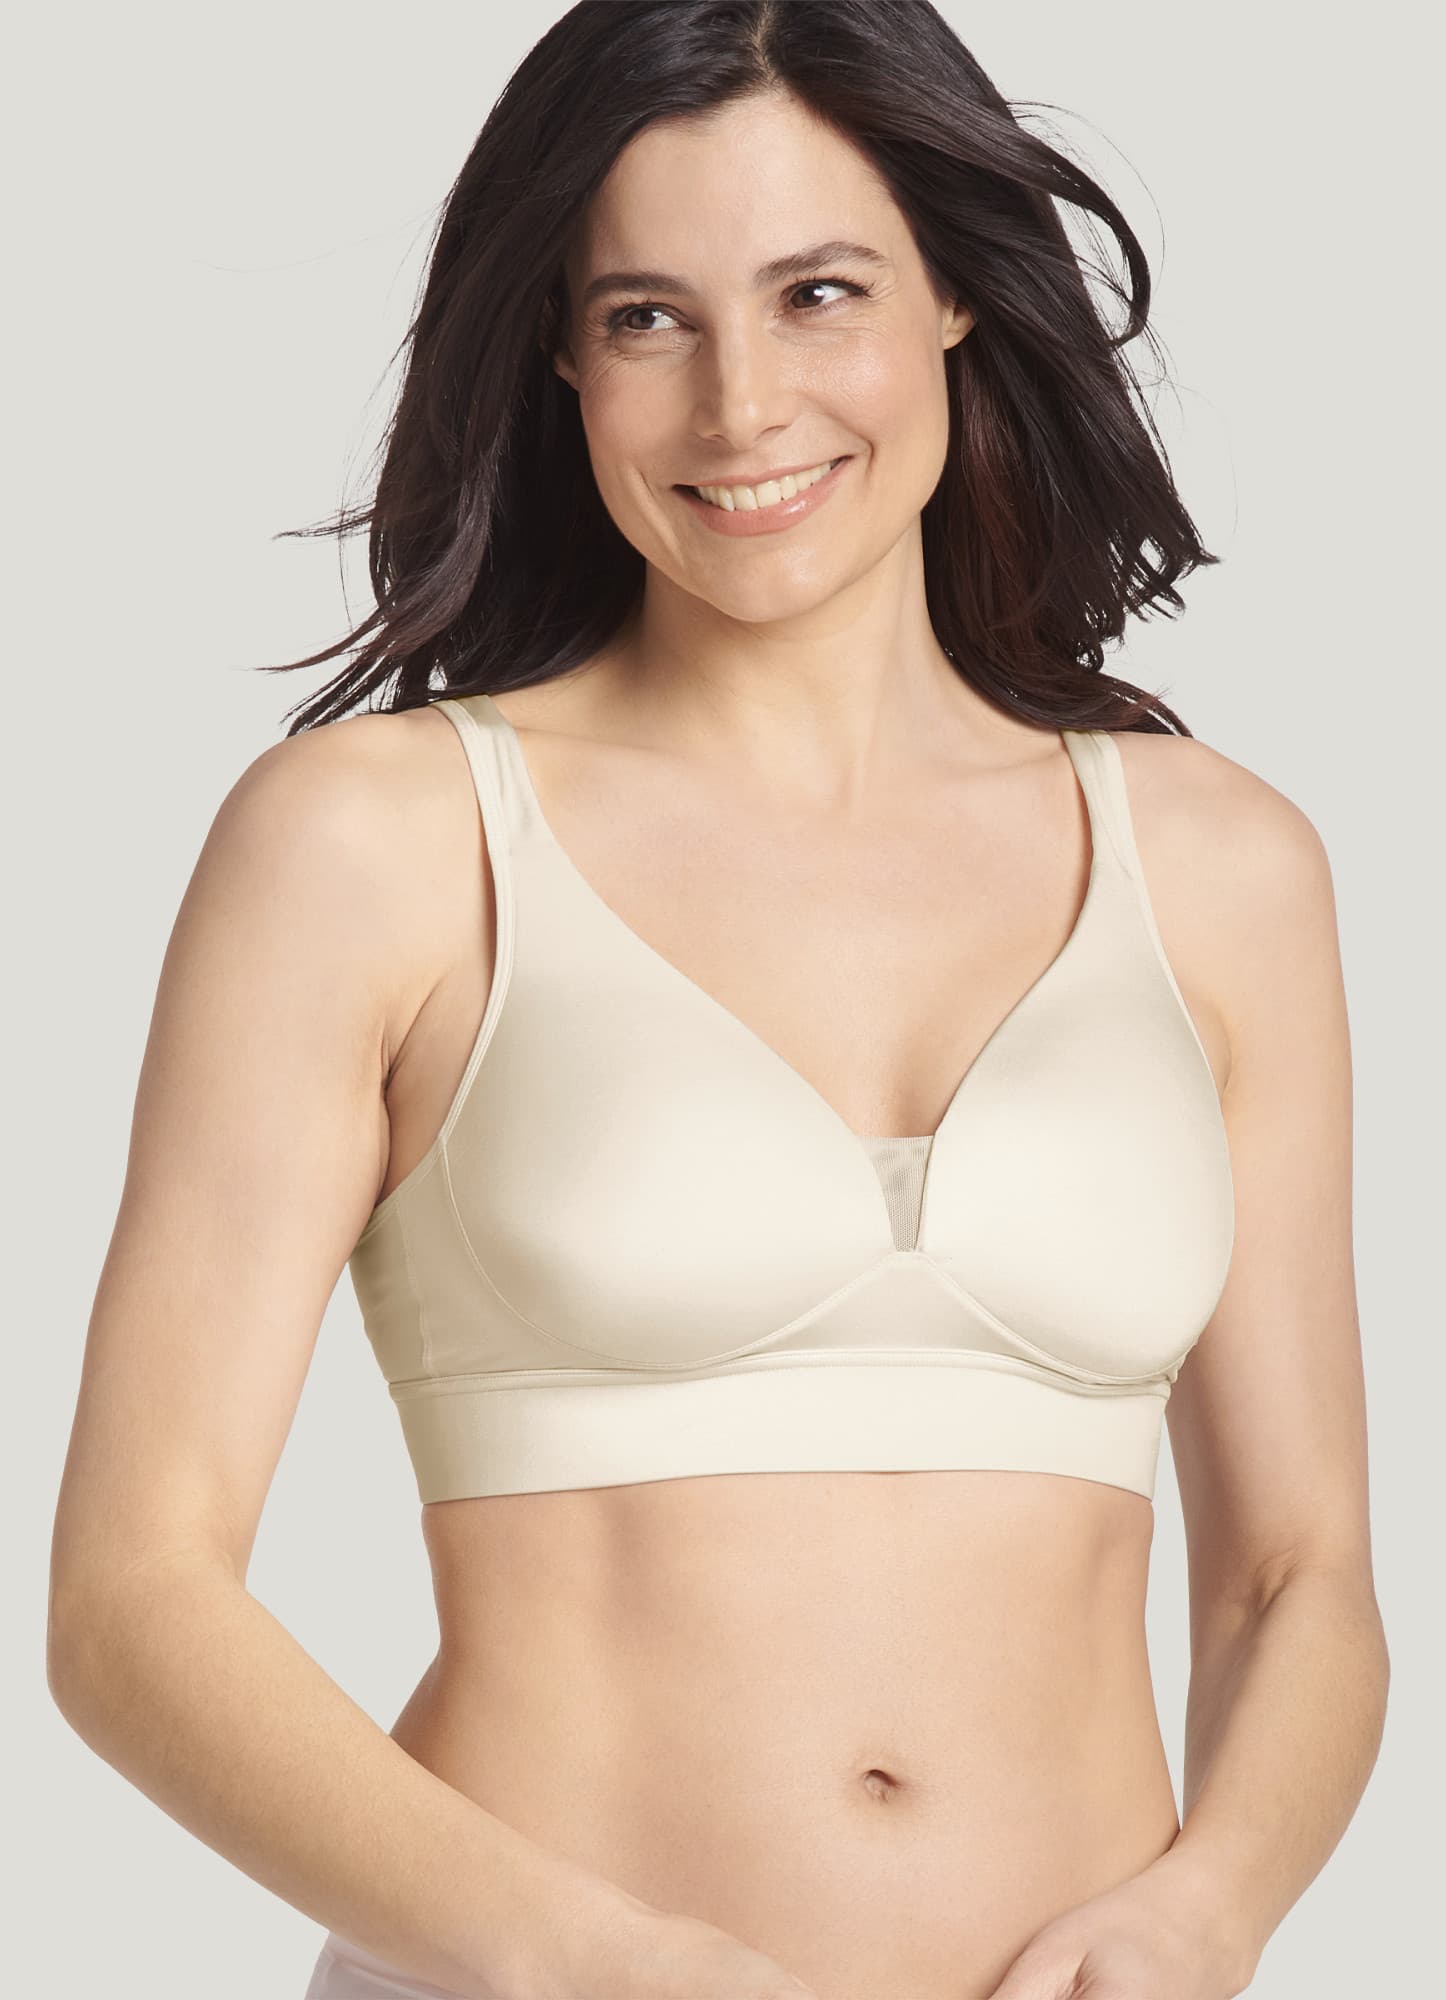 Jockey Forever Fit Molded Cup Active Lifestyle Bra ROSE PETAL 2X 3485